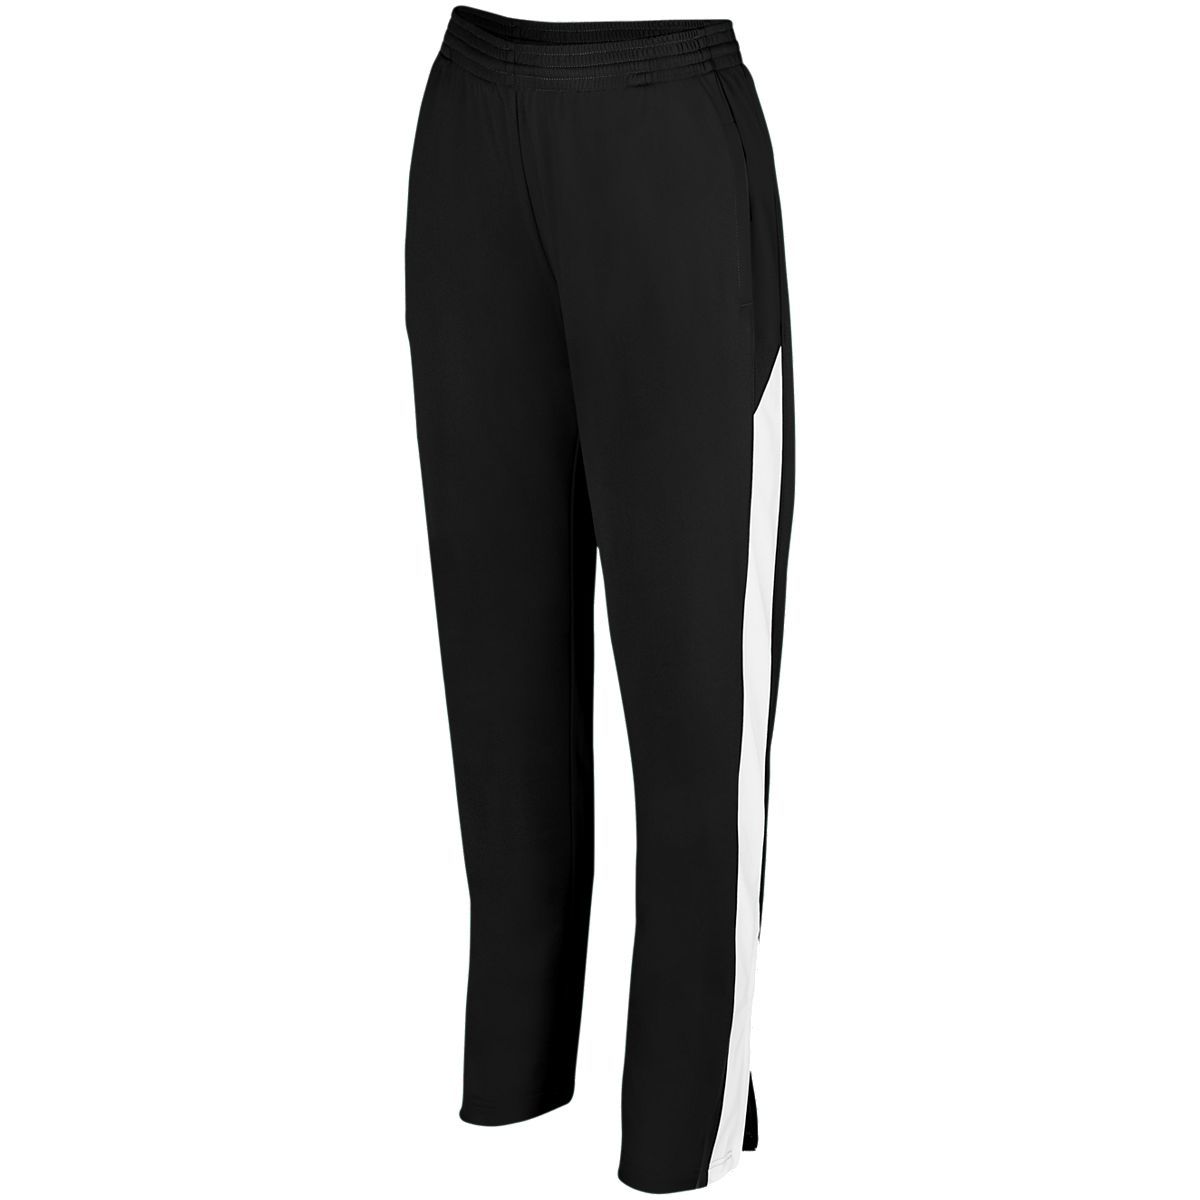 Augusta Sportswear Ladies Medalist Pant 2.0 in Black/White  -Part of the Ladies, Ladies-Pants, Pants, Augusta-Products product lines at KanaleyCreations.com